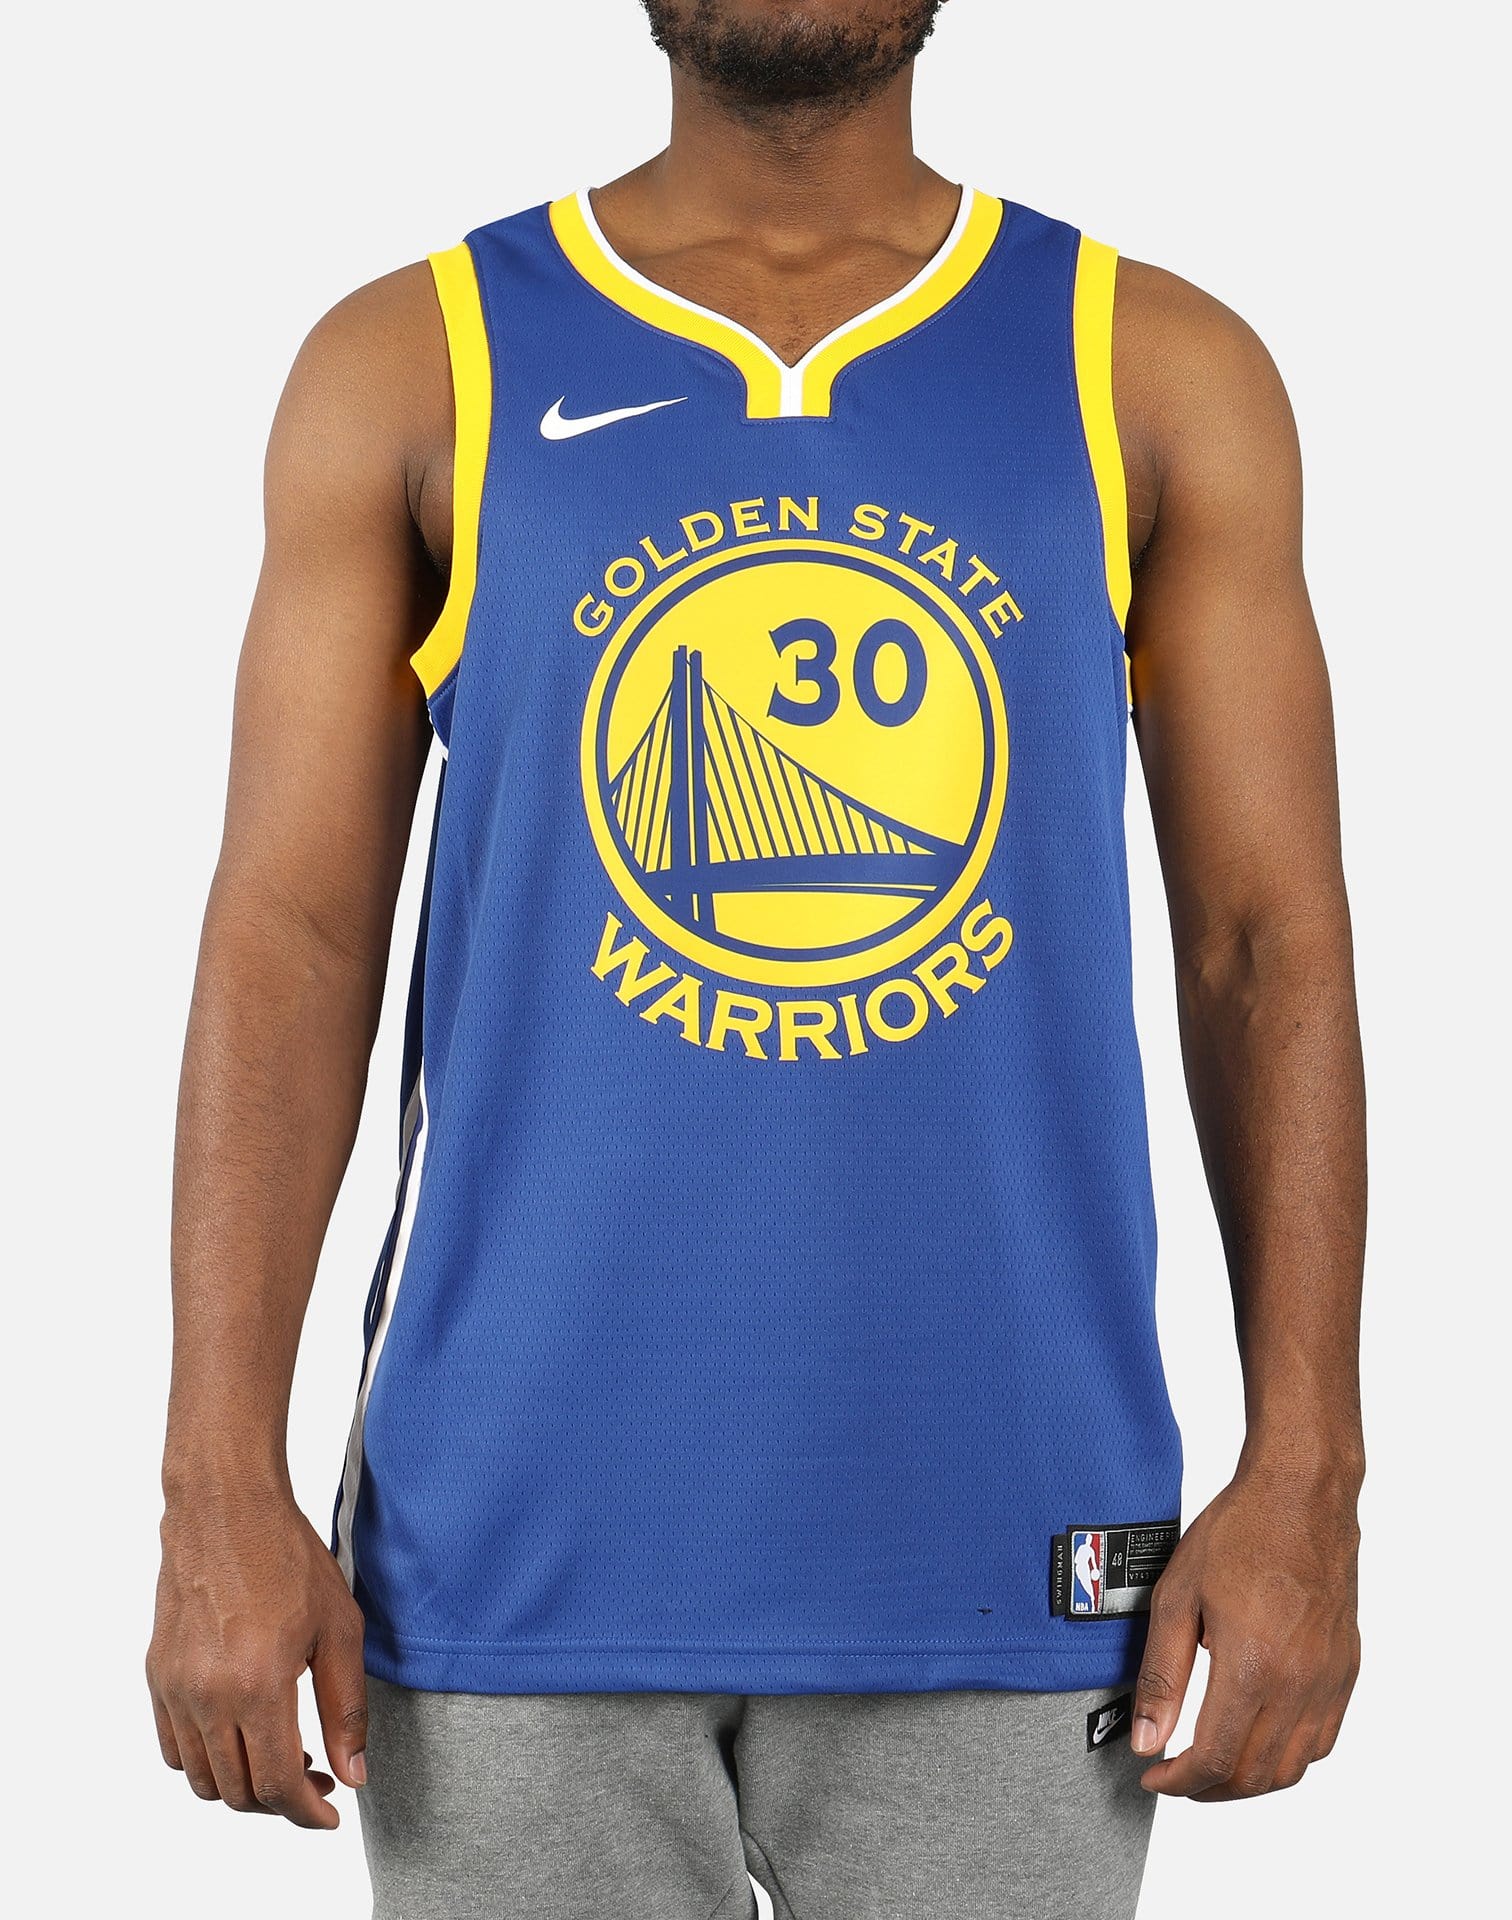 Men's Nike Stephen Curry White Golden State Warriors Authentic Jersey - Association Edition